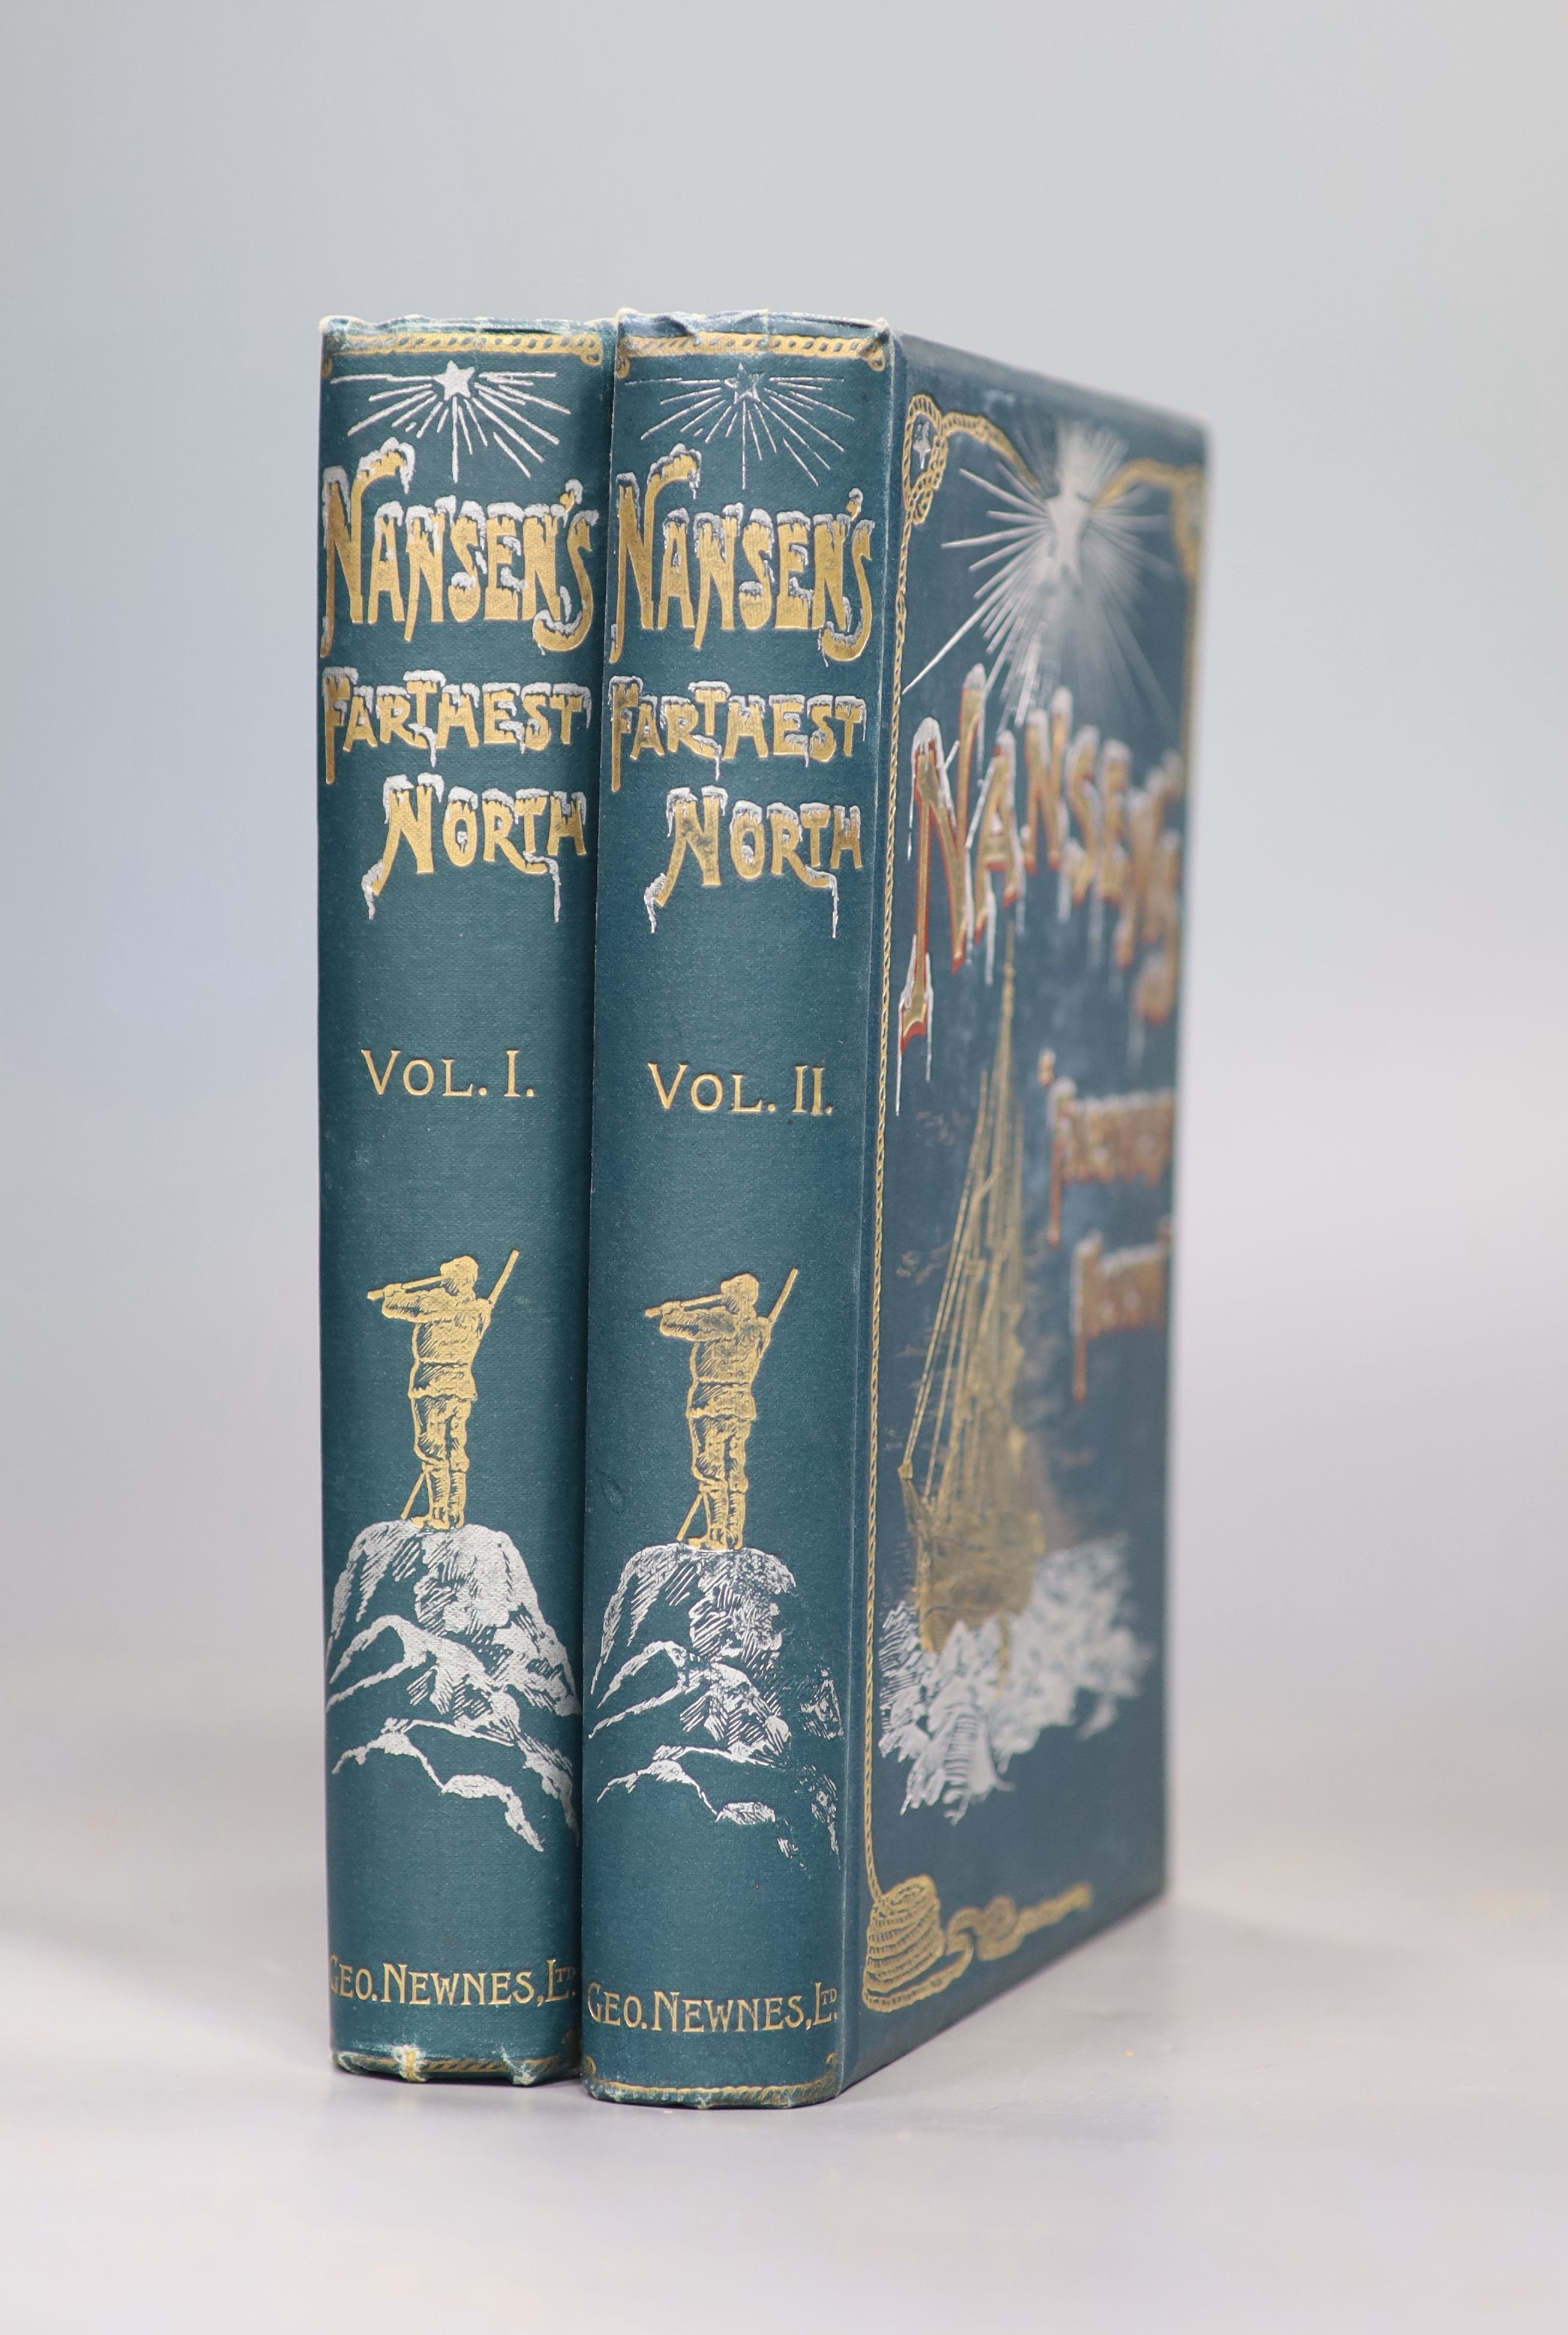 Nansen, Fridtjof - Farthest North, 2 vols, 2nd English edition, 8vo, original silver and gilt pictorial cloth, extremities rubbed, with folding map (with small tear) George Newnes, London, 1898